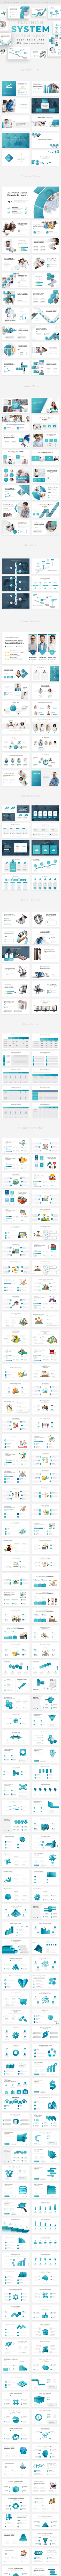 Planning System Pitch Deck Powerpoint Template